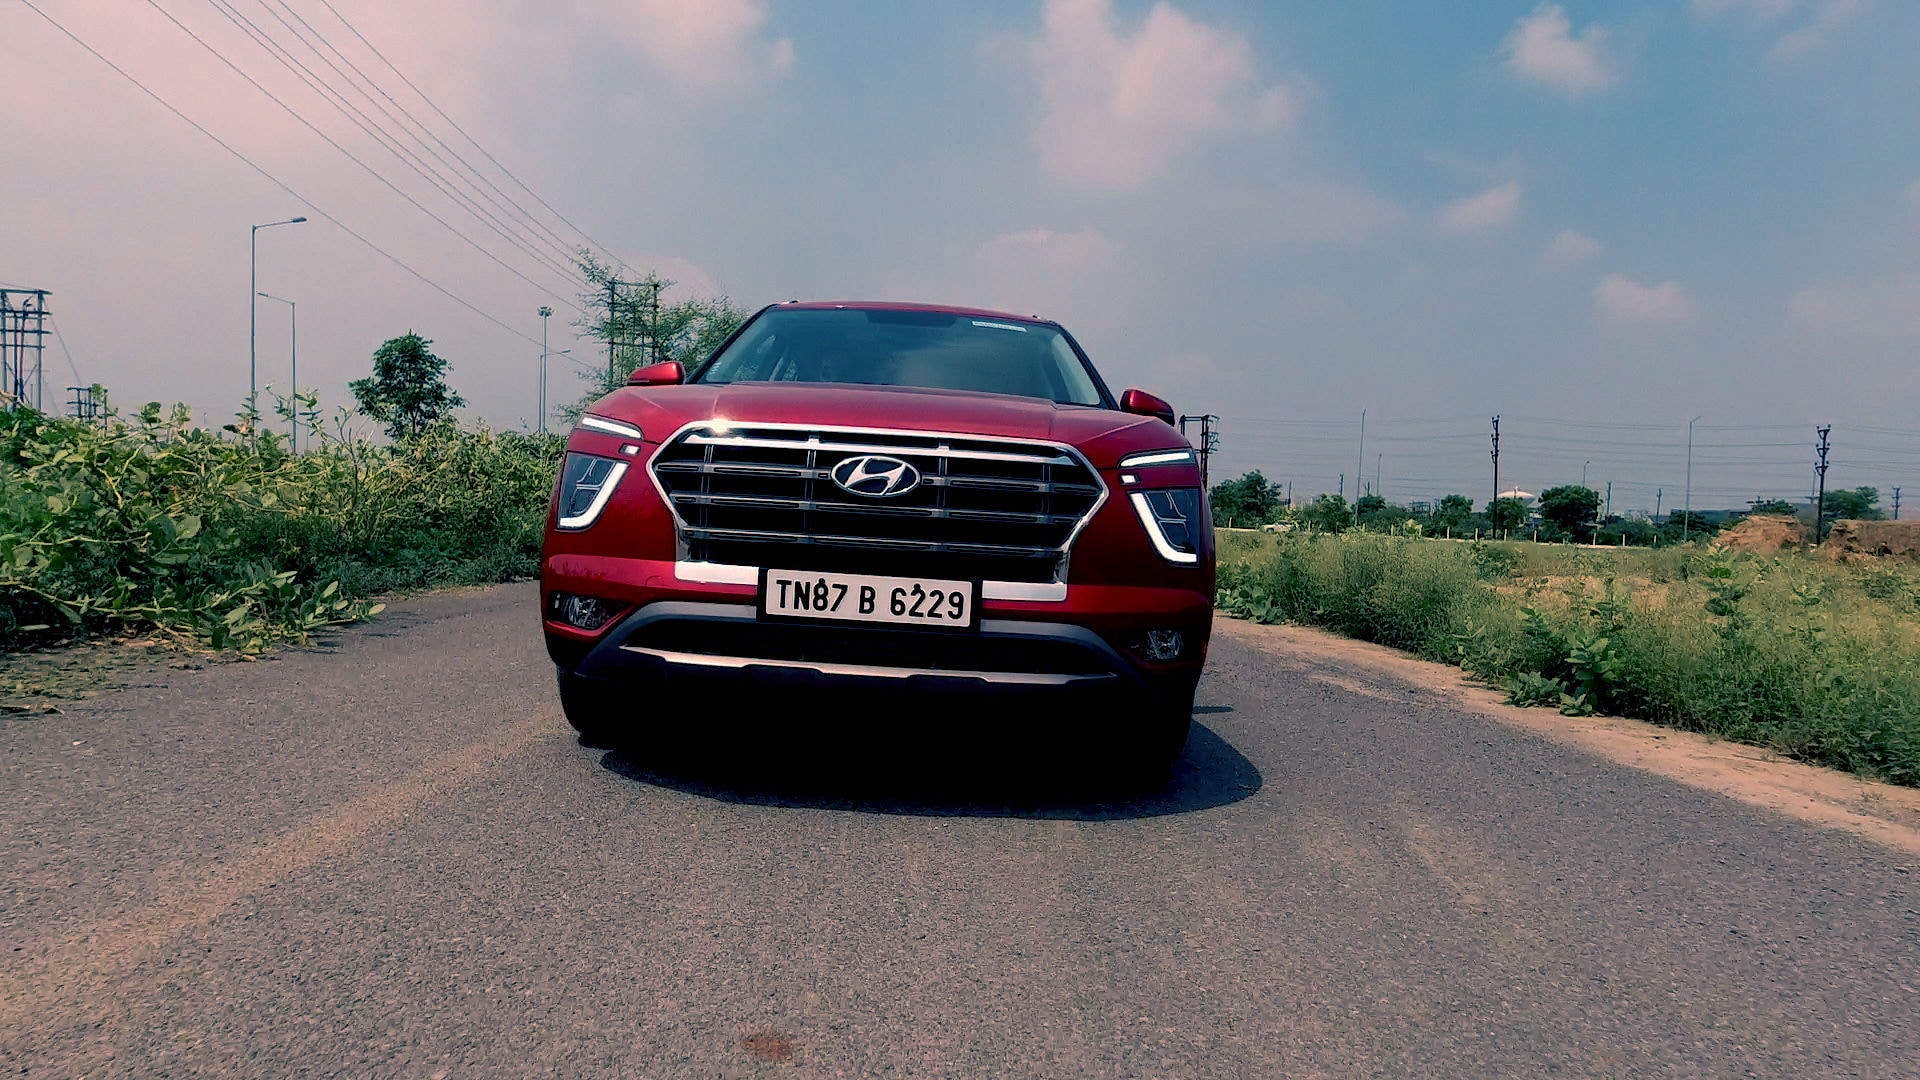 Creta continues to handle a wide variety of road conditions with effortless ease. (HT Auto/Sabyasachi Dasgupta)